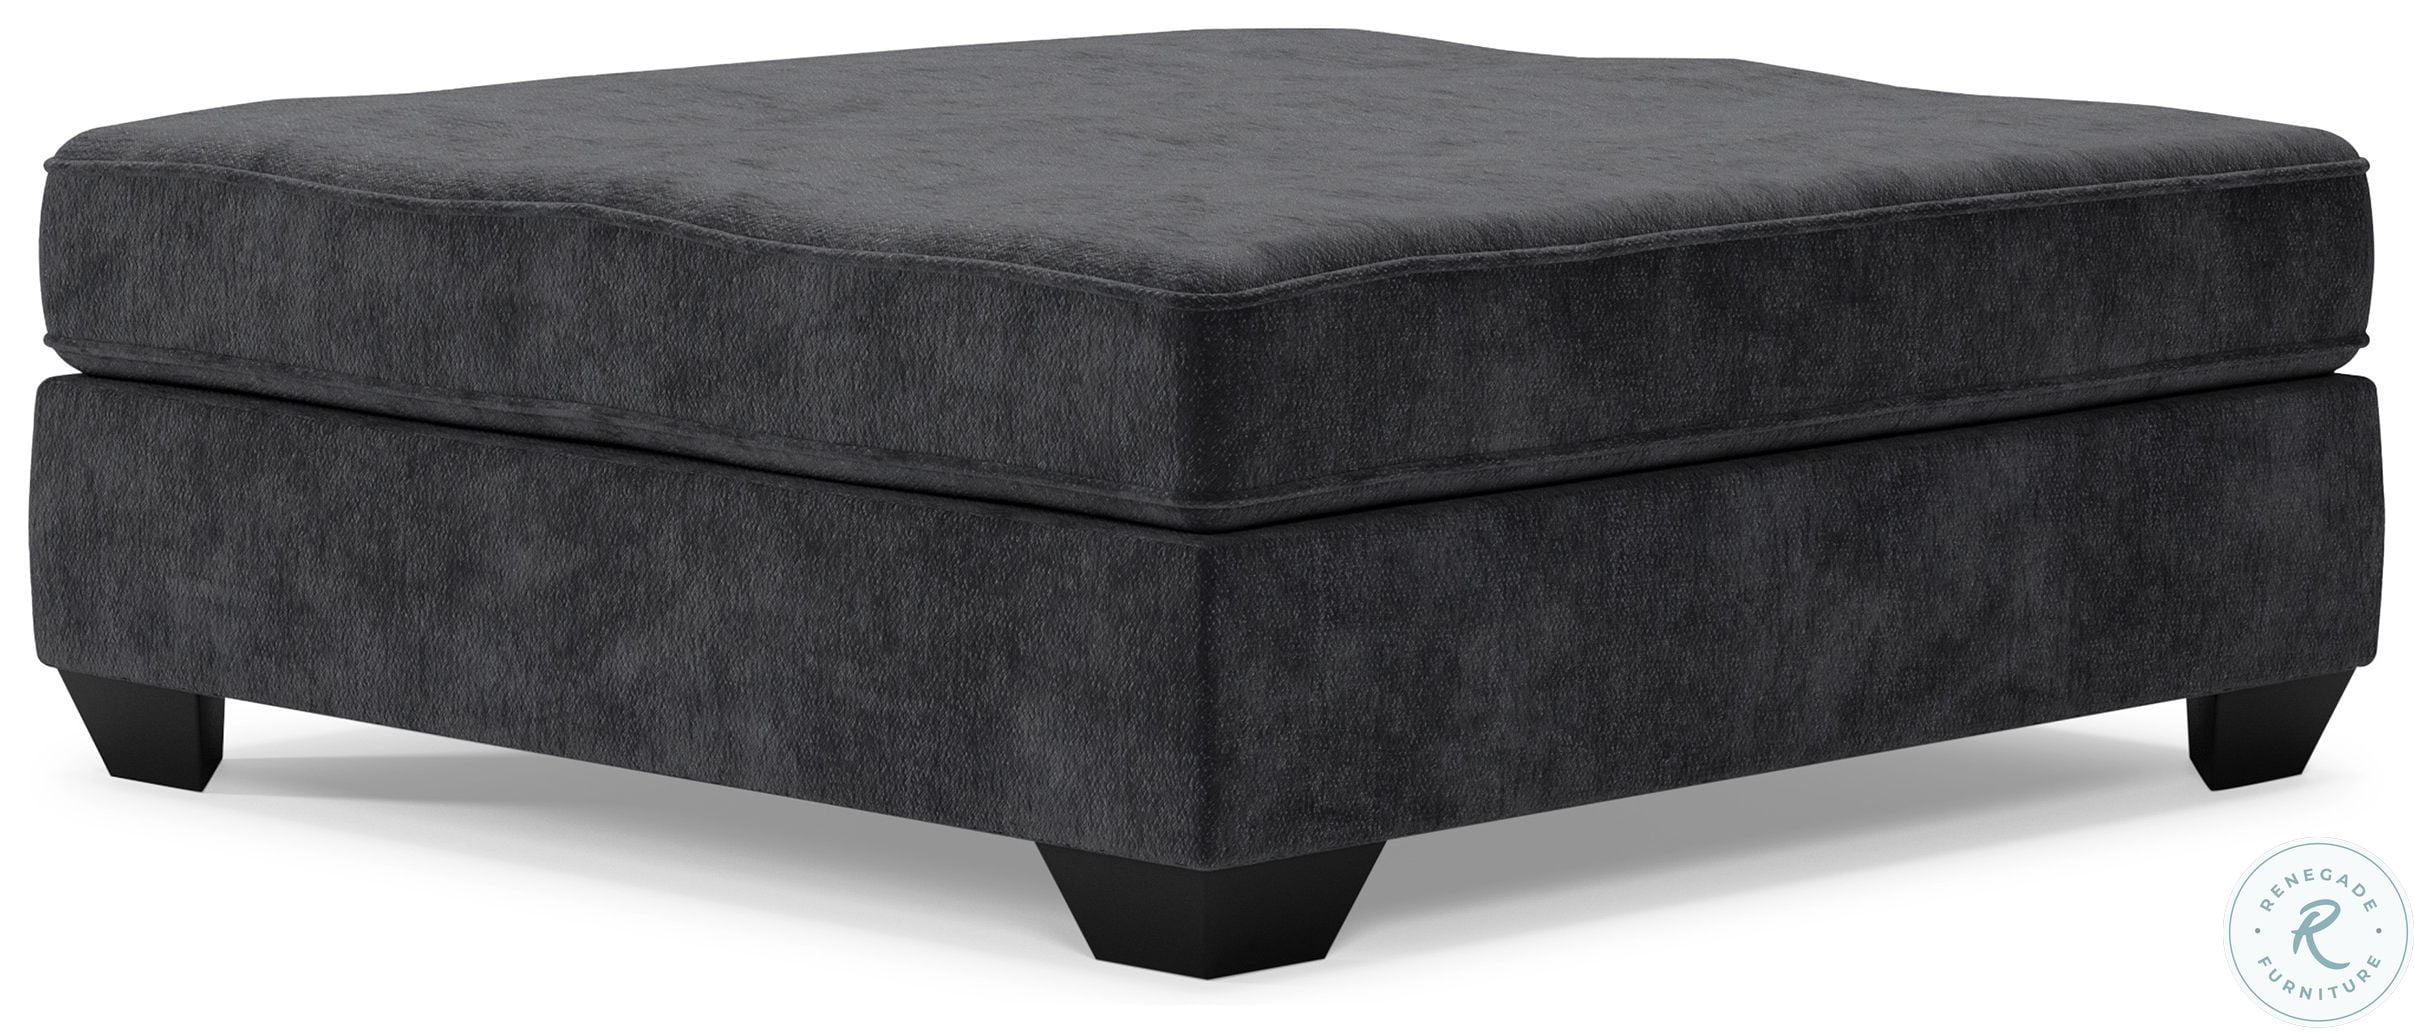 Rawcliffe Charcoal Oversized Accent Ottoman